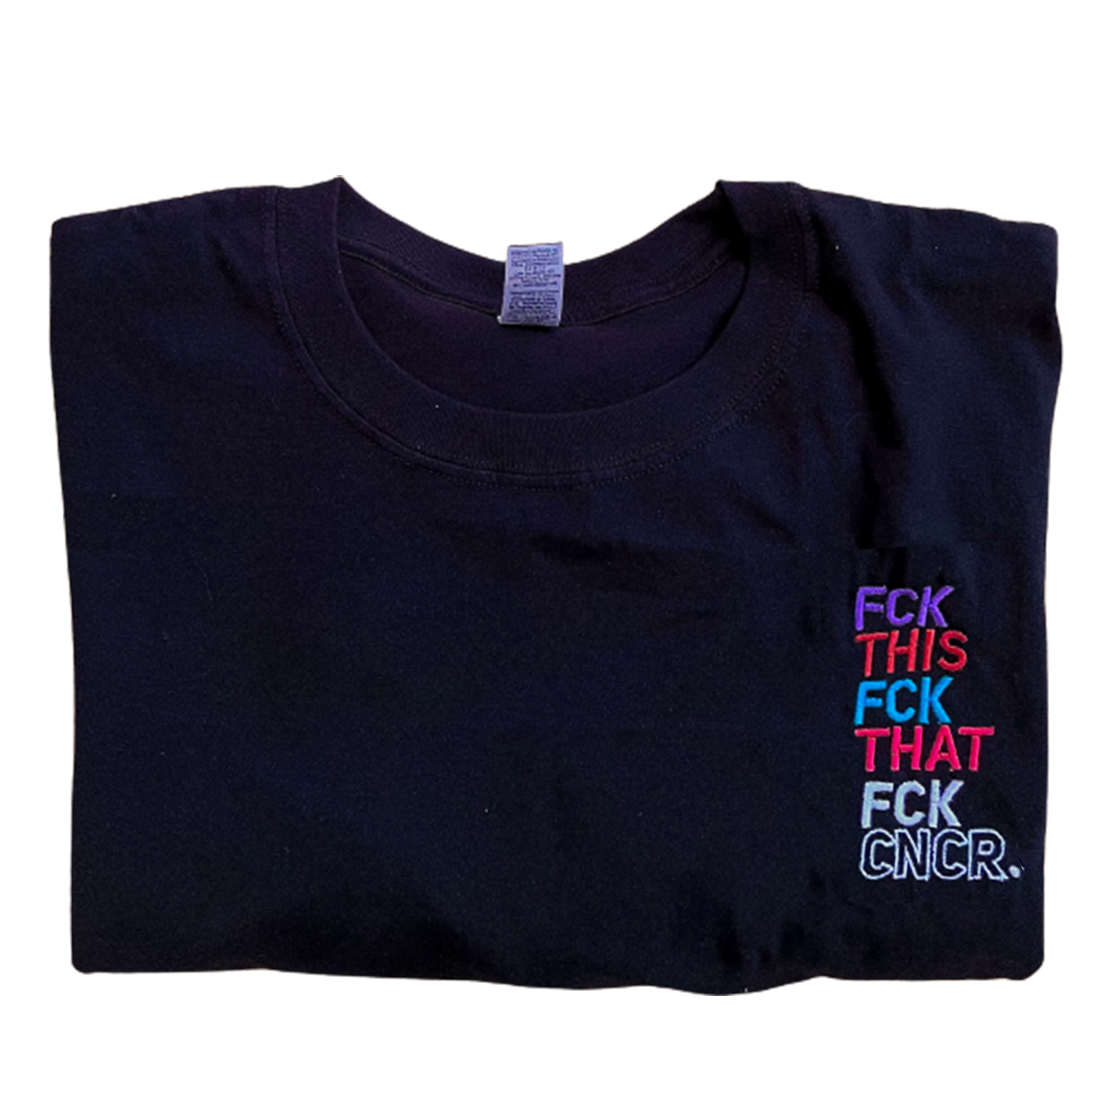 FCK EVERYTHING! The Shirt Edition